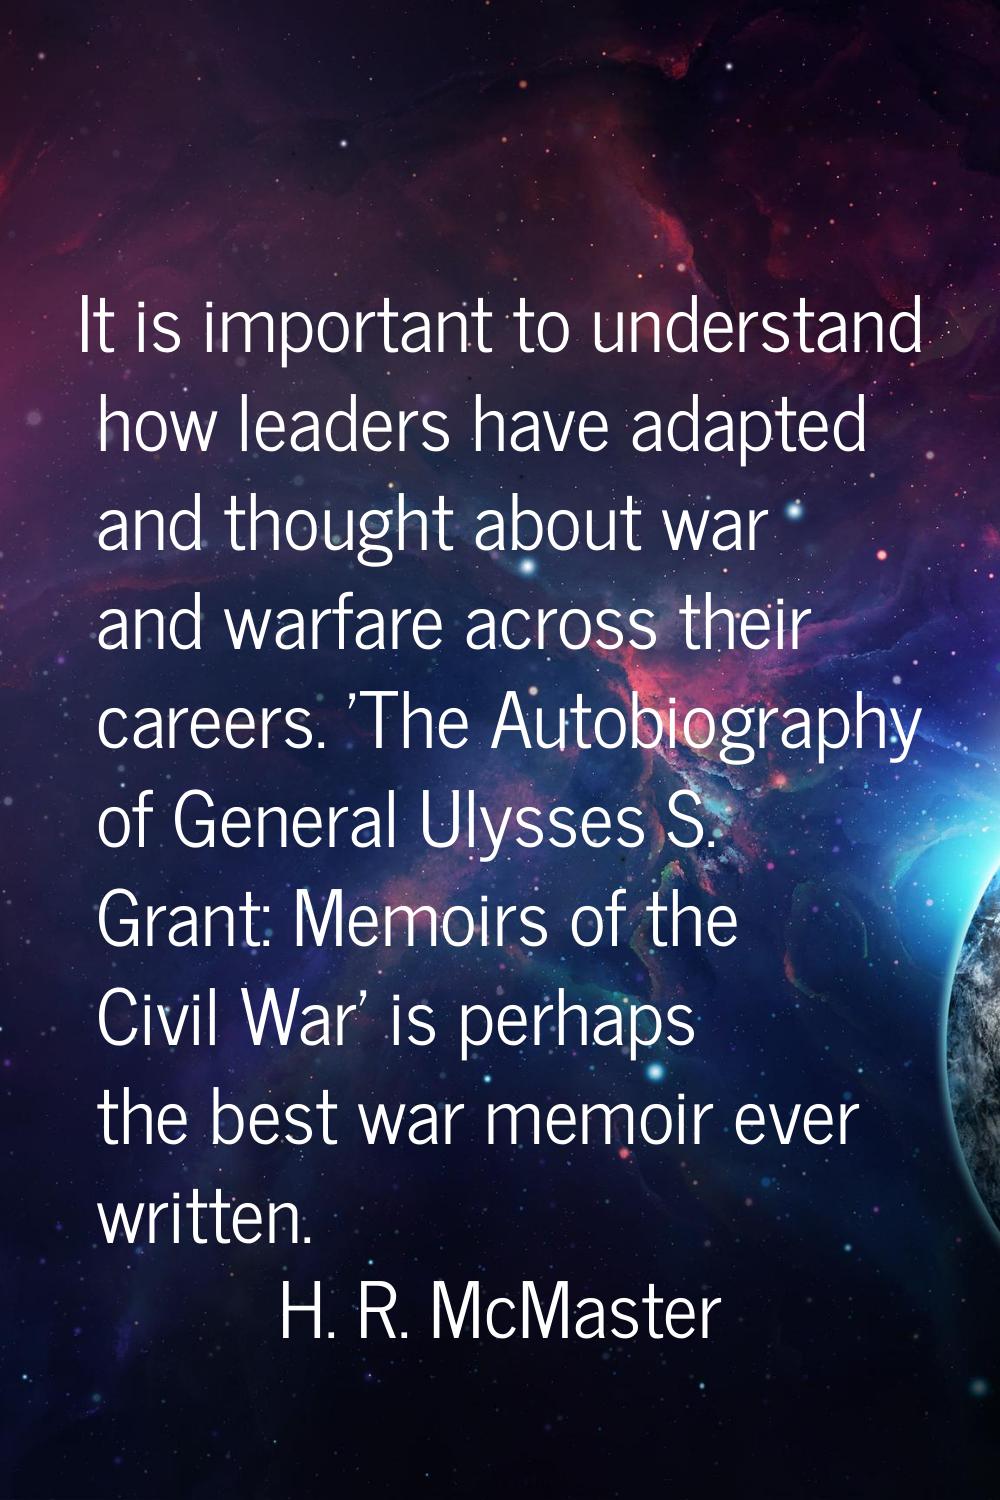 It is important to understand how leaders have adapted and thought about war and warfare across the